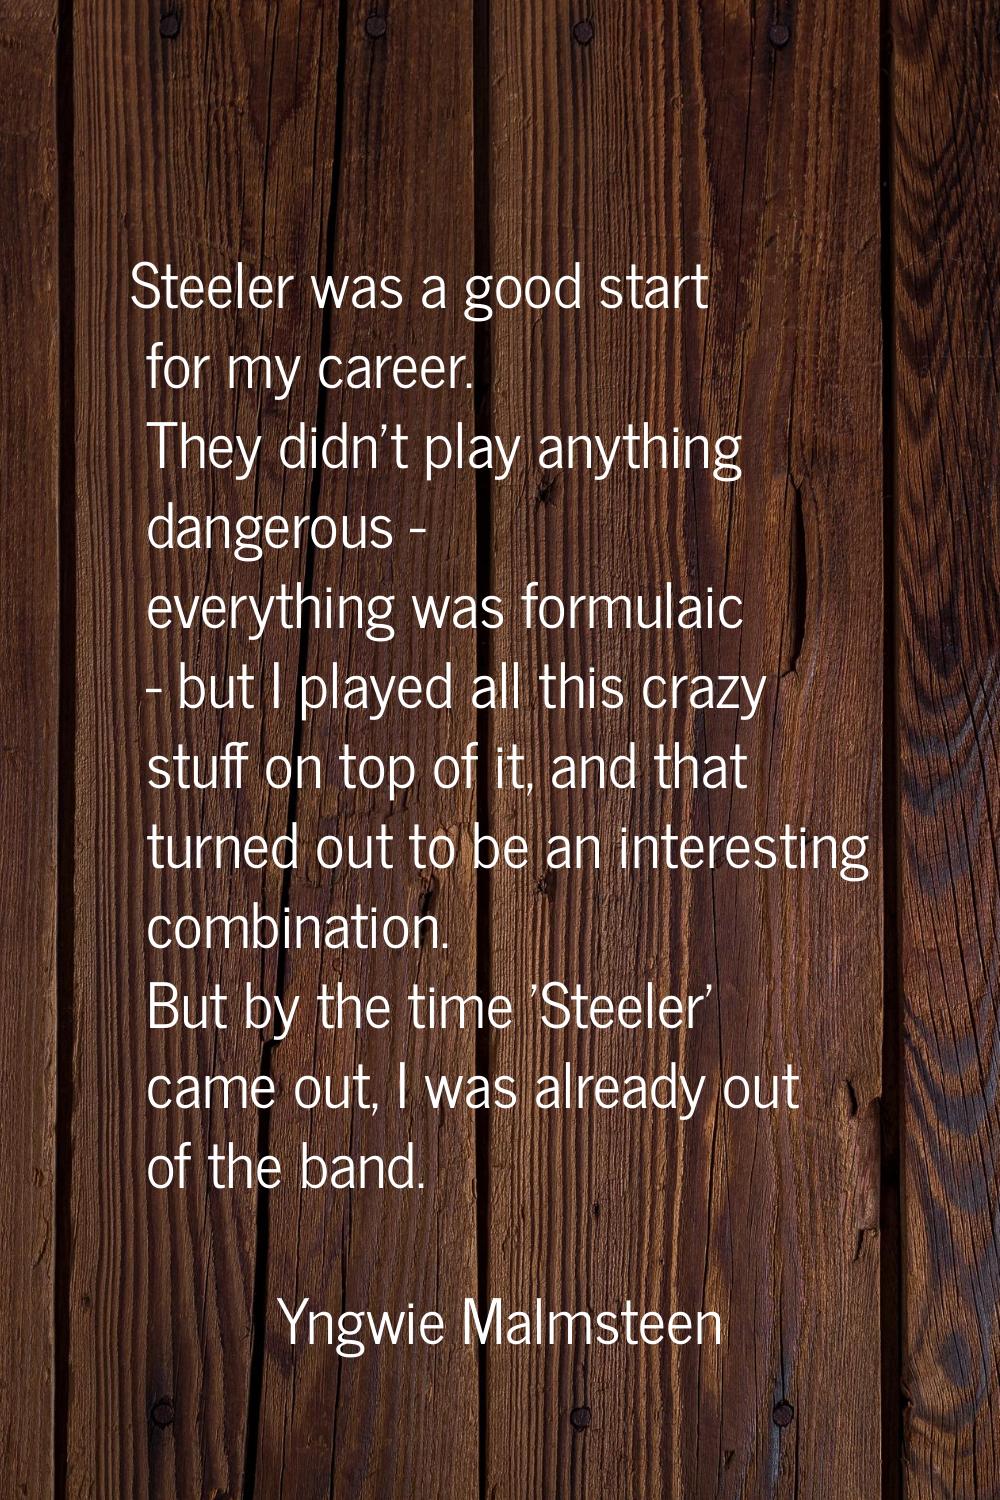 Steeler was a good start for my career. They didn't play anything dangerous - everything was formul